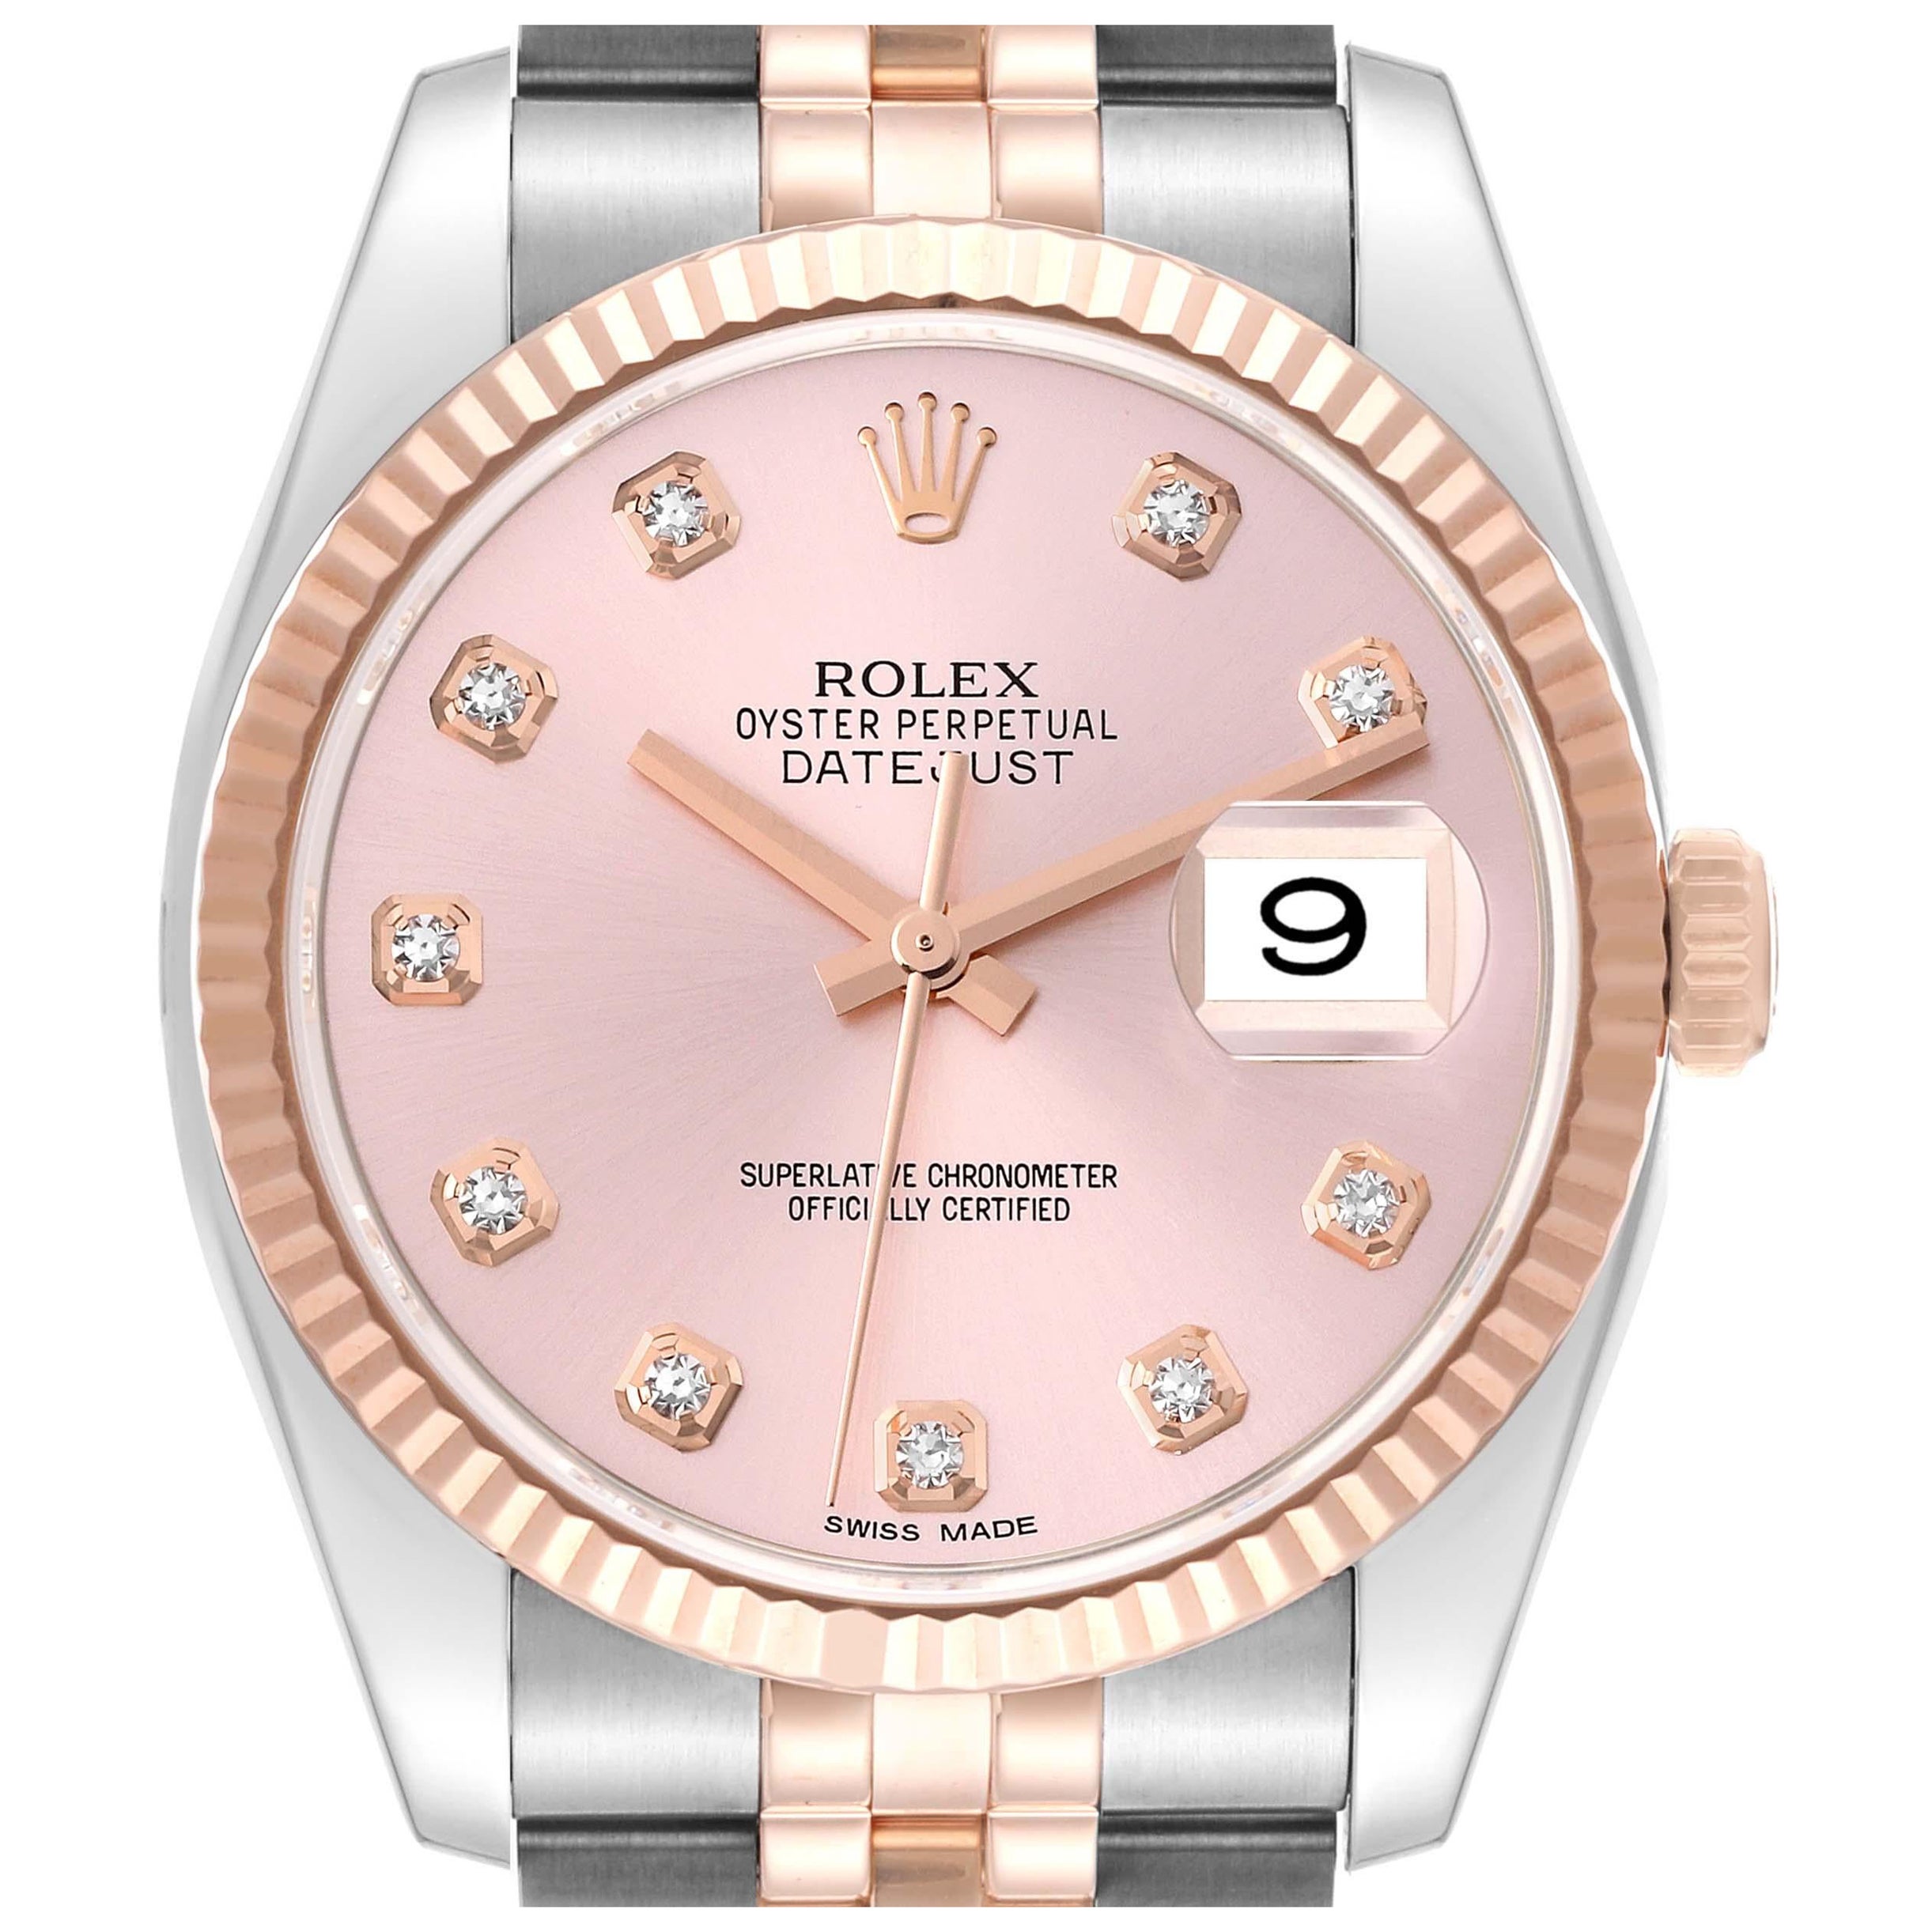 Rolex Datejust Steel Rose Gold Pink Diamond Dial Mens Watch 116231 For Sale